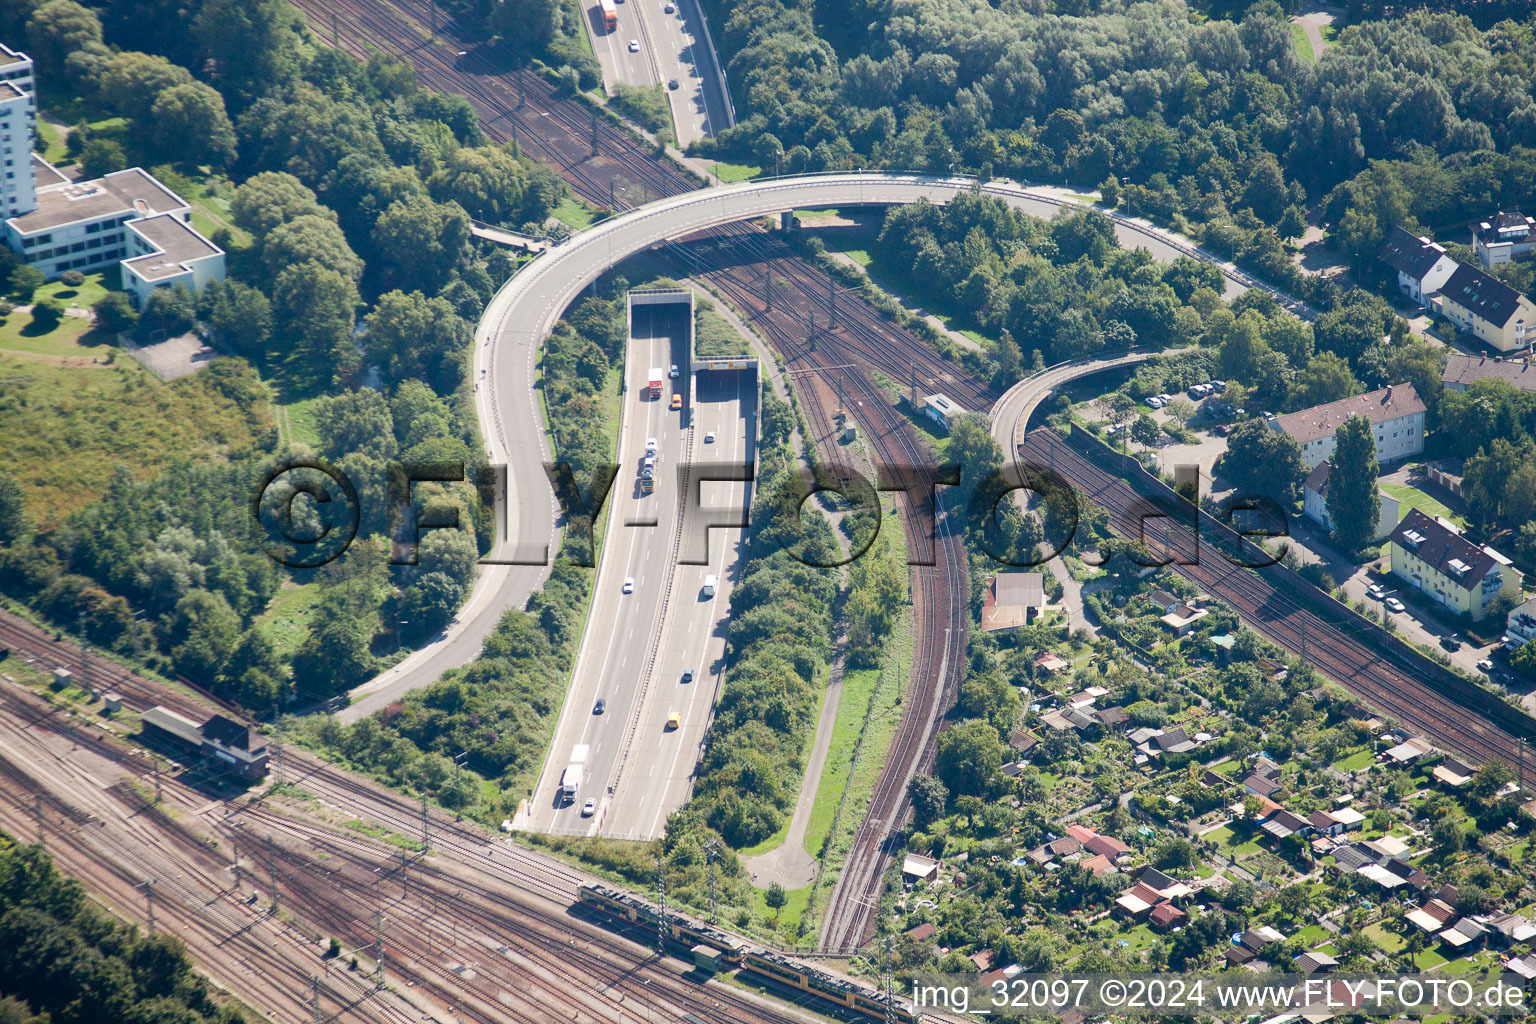 Drone recording of Entry and exit area of Edeltrud Tunnel in the district Beiertheim - Bulach in Karlsruhe in the state Baden-Wurttemberg